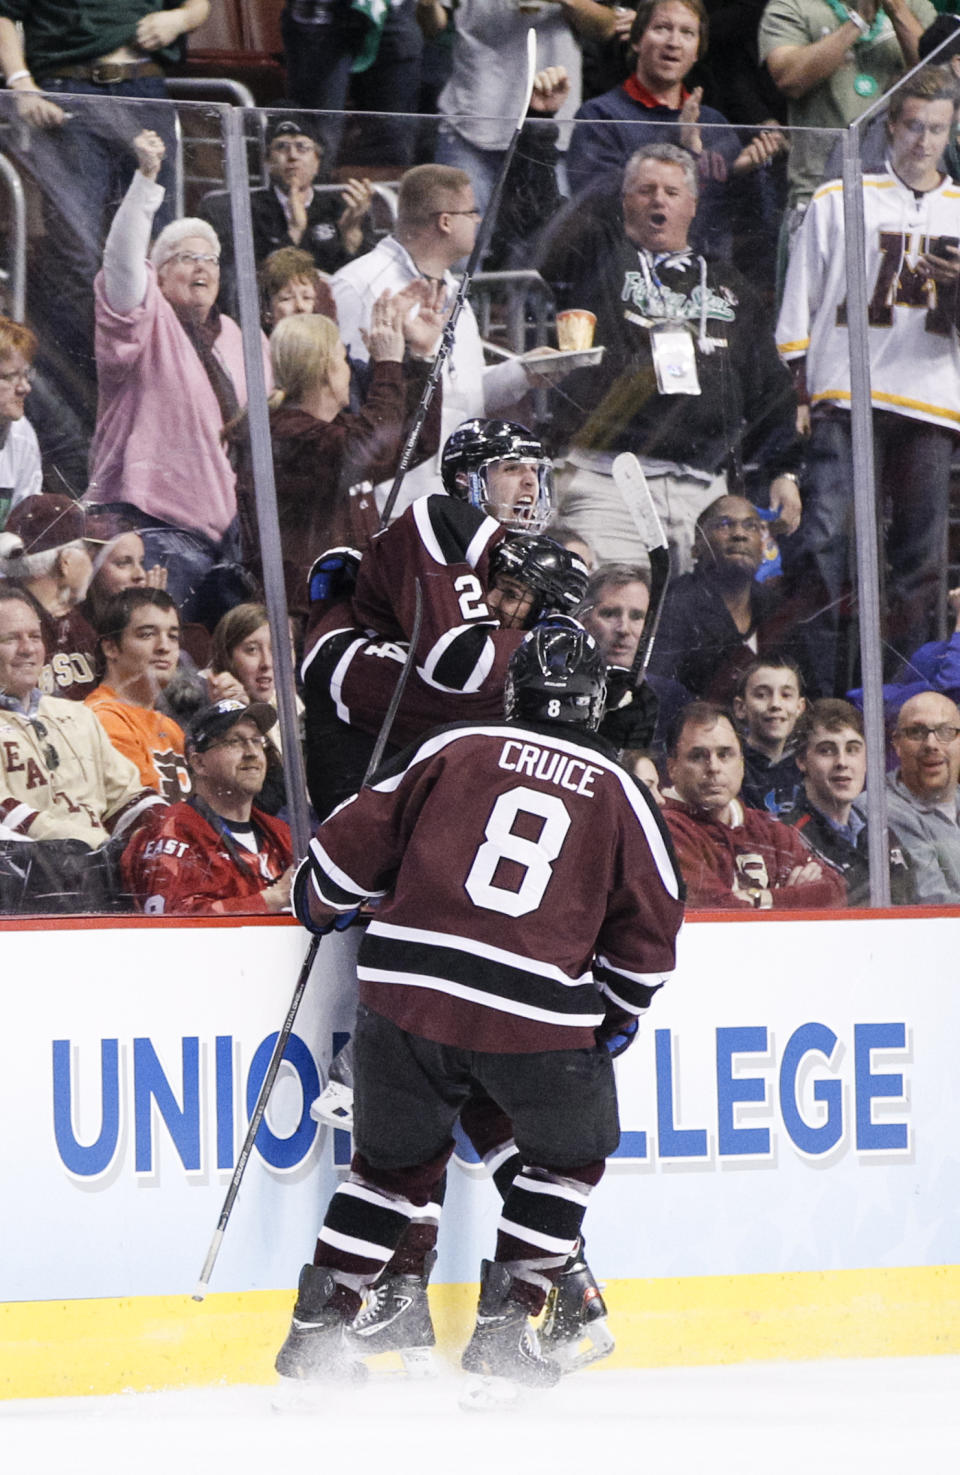 Union's Mike Vecchione, top, leaps into the arms of Sebastien Gingras, center, after scoring a goal with Nick Cruice, bottom, approaching during the third period of an NCAA men's college hockey Frozen Four tournament game against Boston College, Thursday, April 10, 2014, in Philadelphia. Union College won 5-4. (AP Photo/Chris Szagola)